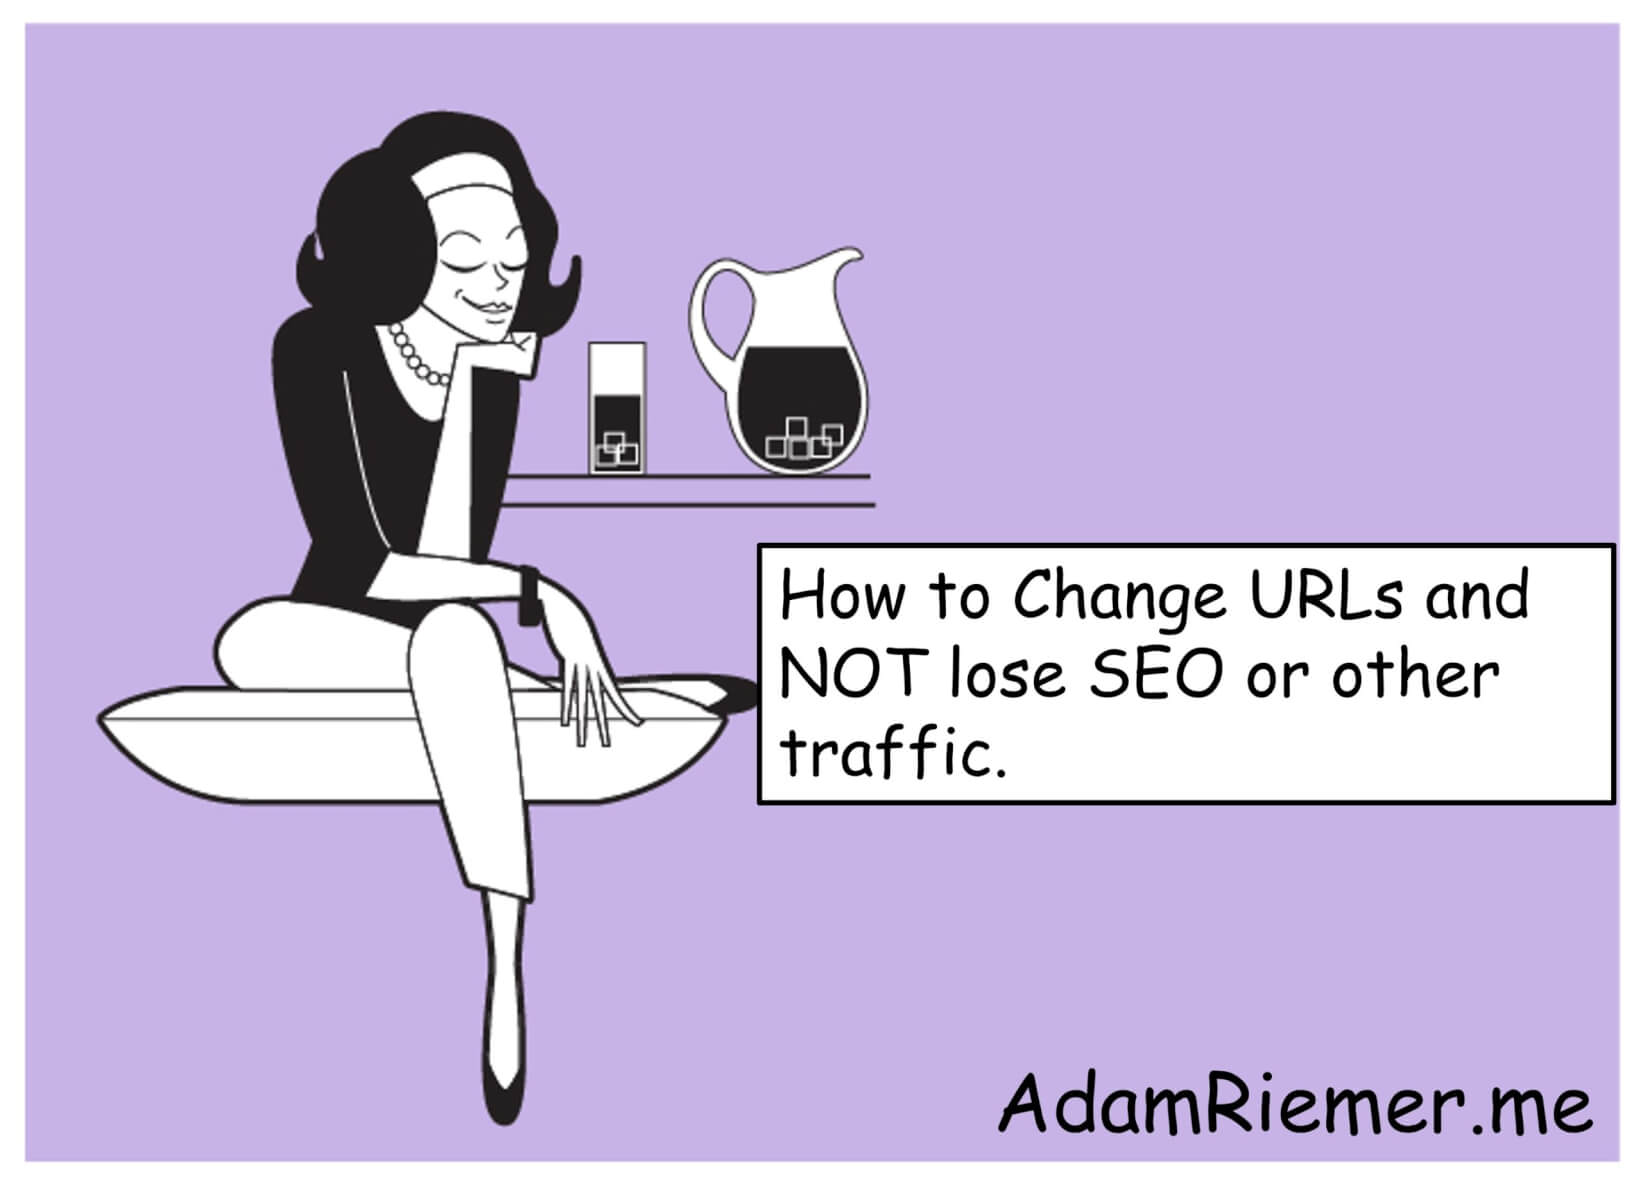 How to Change URLs and NOT lose SEO traffic